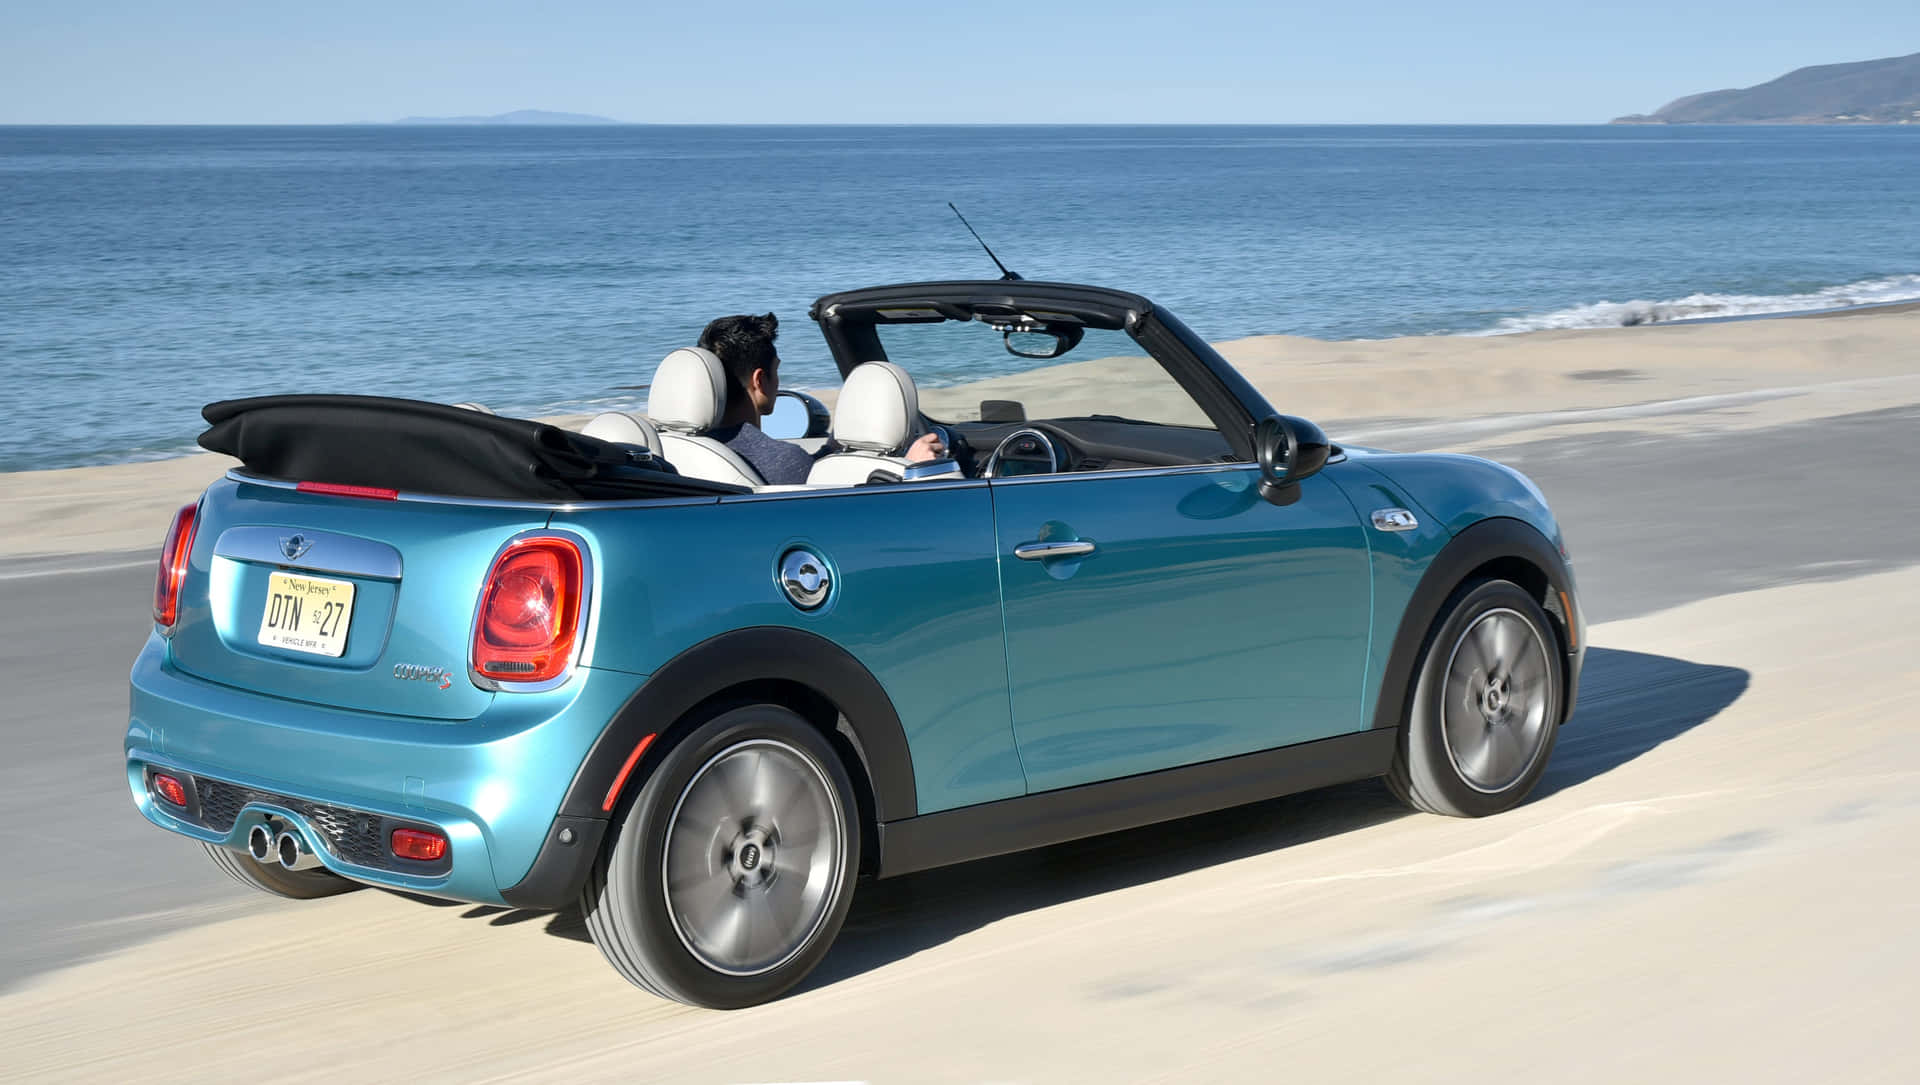 A stylish Mini Cooper Convertible parked by the beachside. Wallpaper